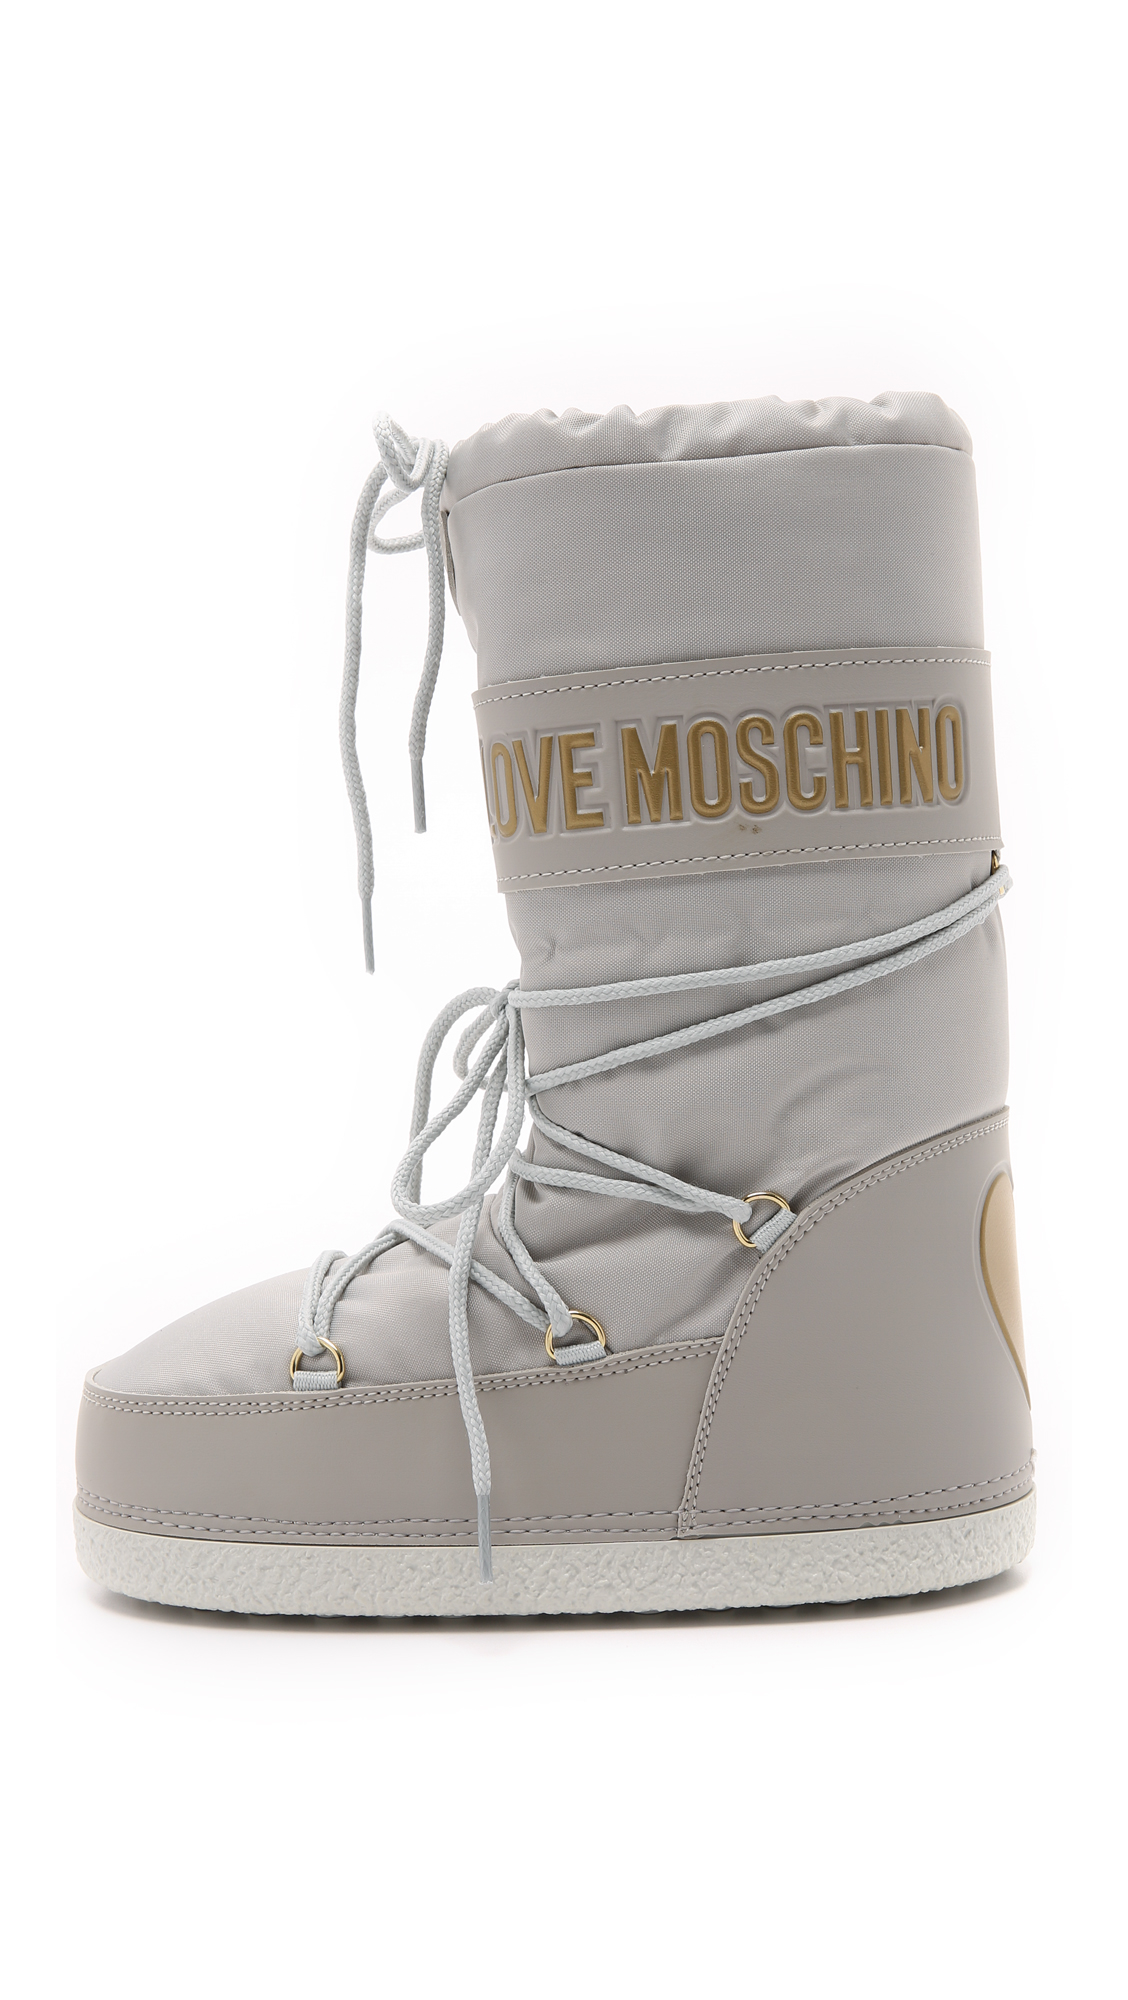 Boutique Moschino Love Moschino Snow Boots - White in Gray - Lyst